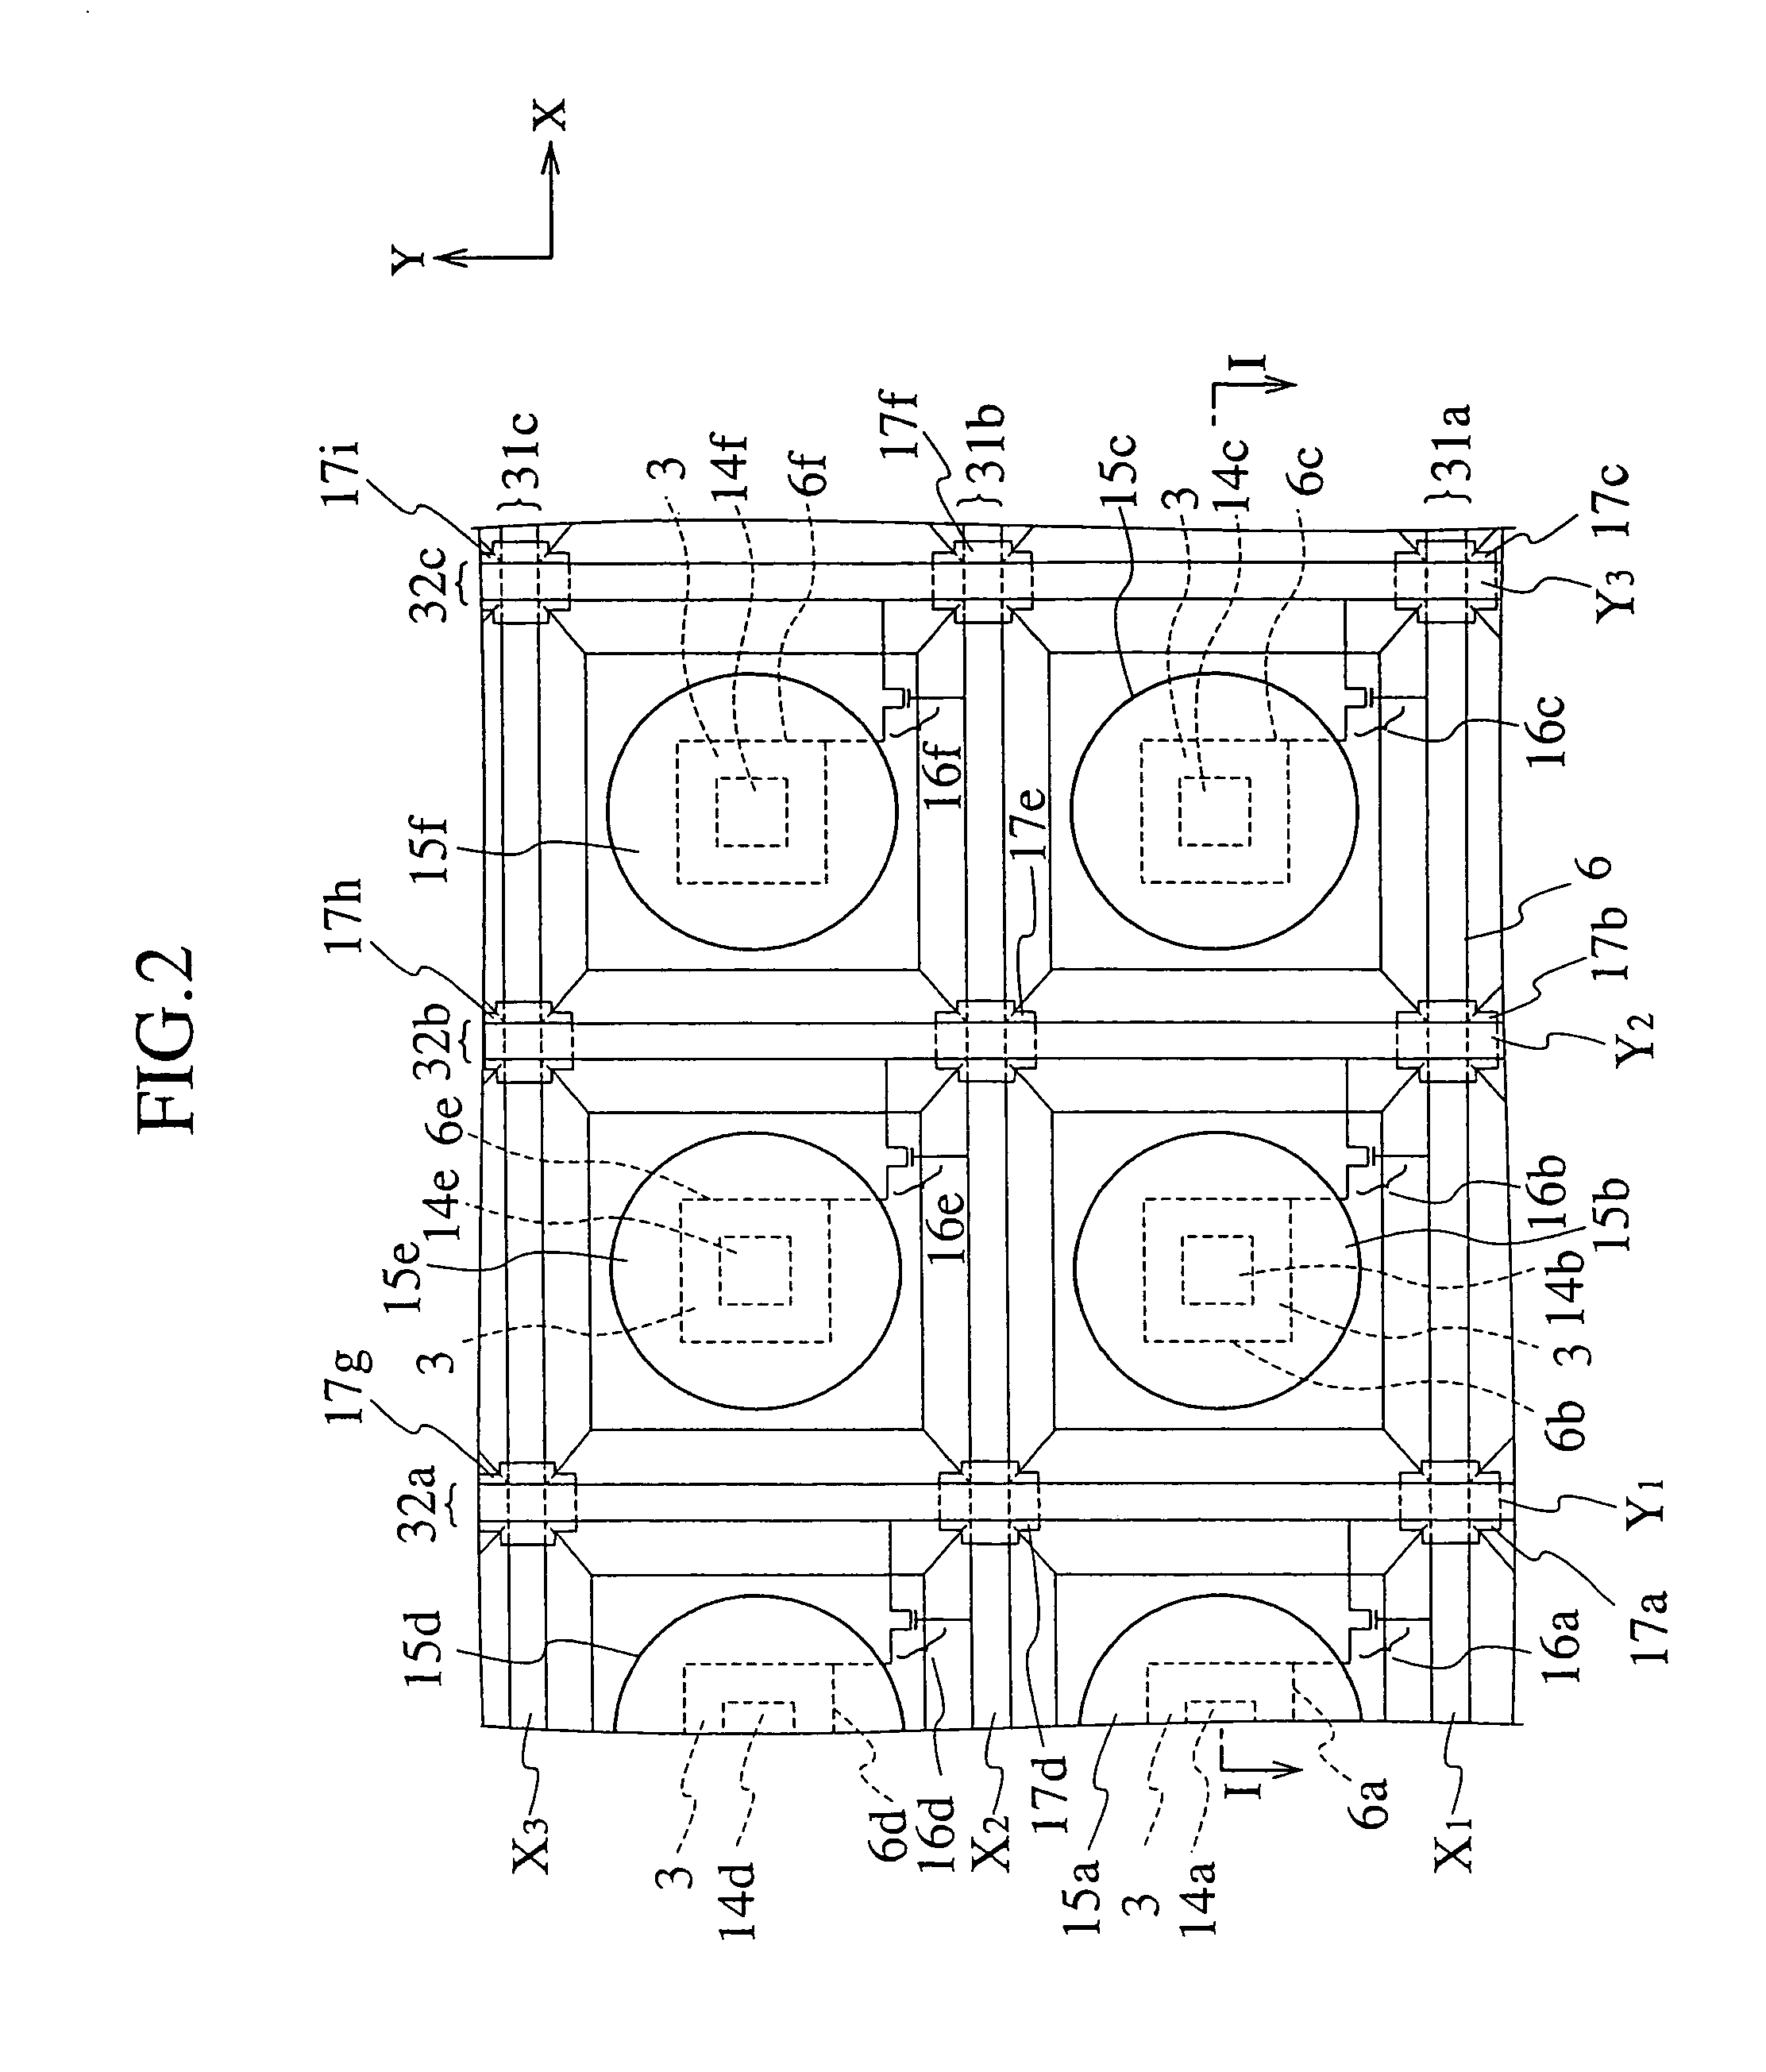 Semiconductor light-emitting device using phosphors for performing wavelength conversion